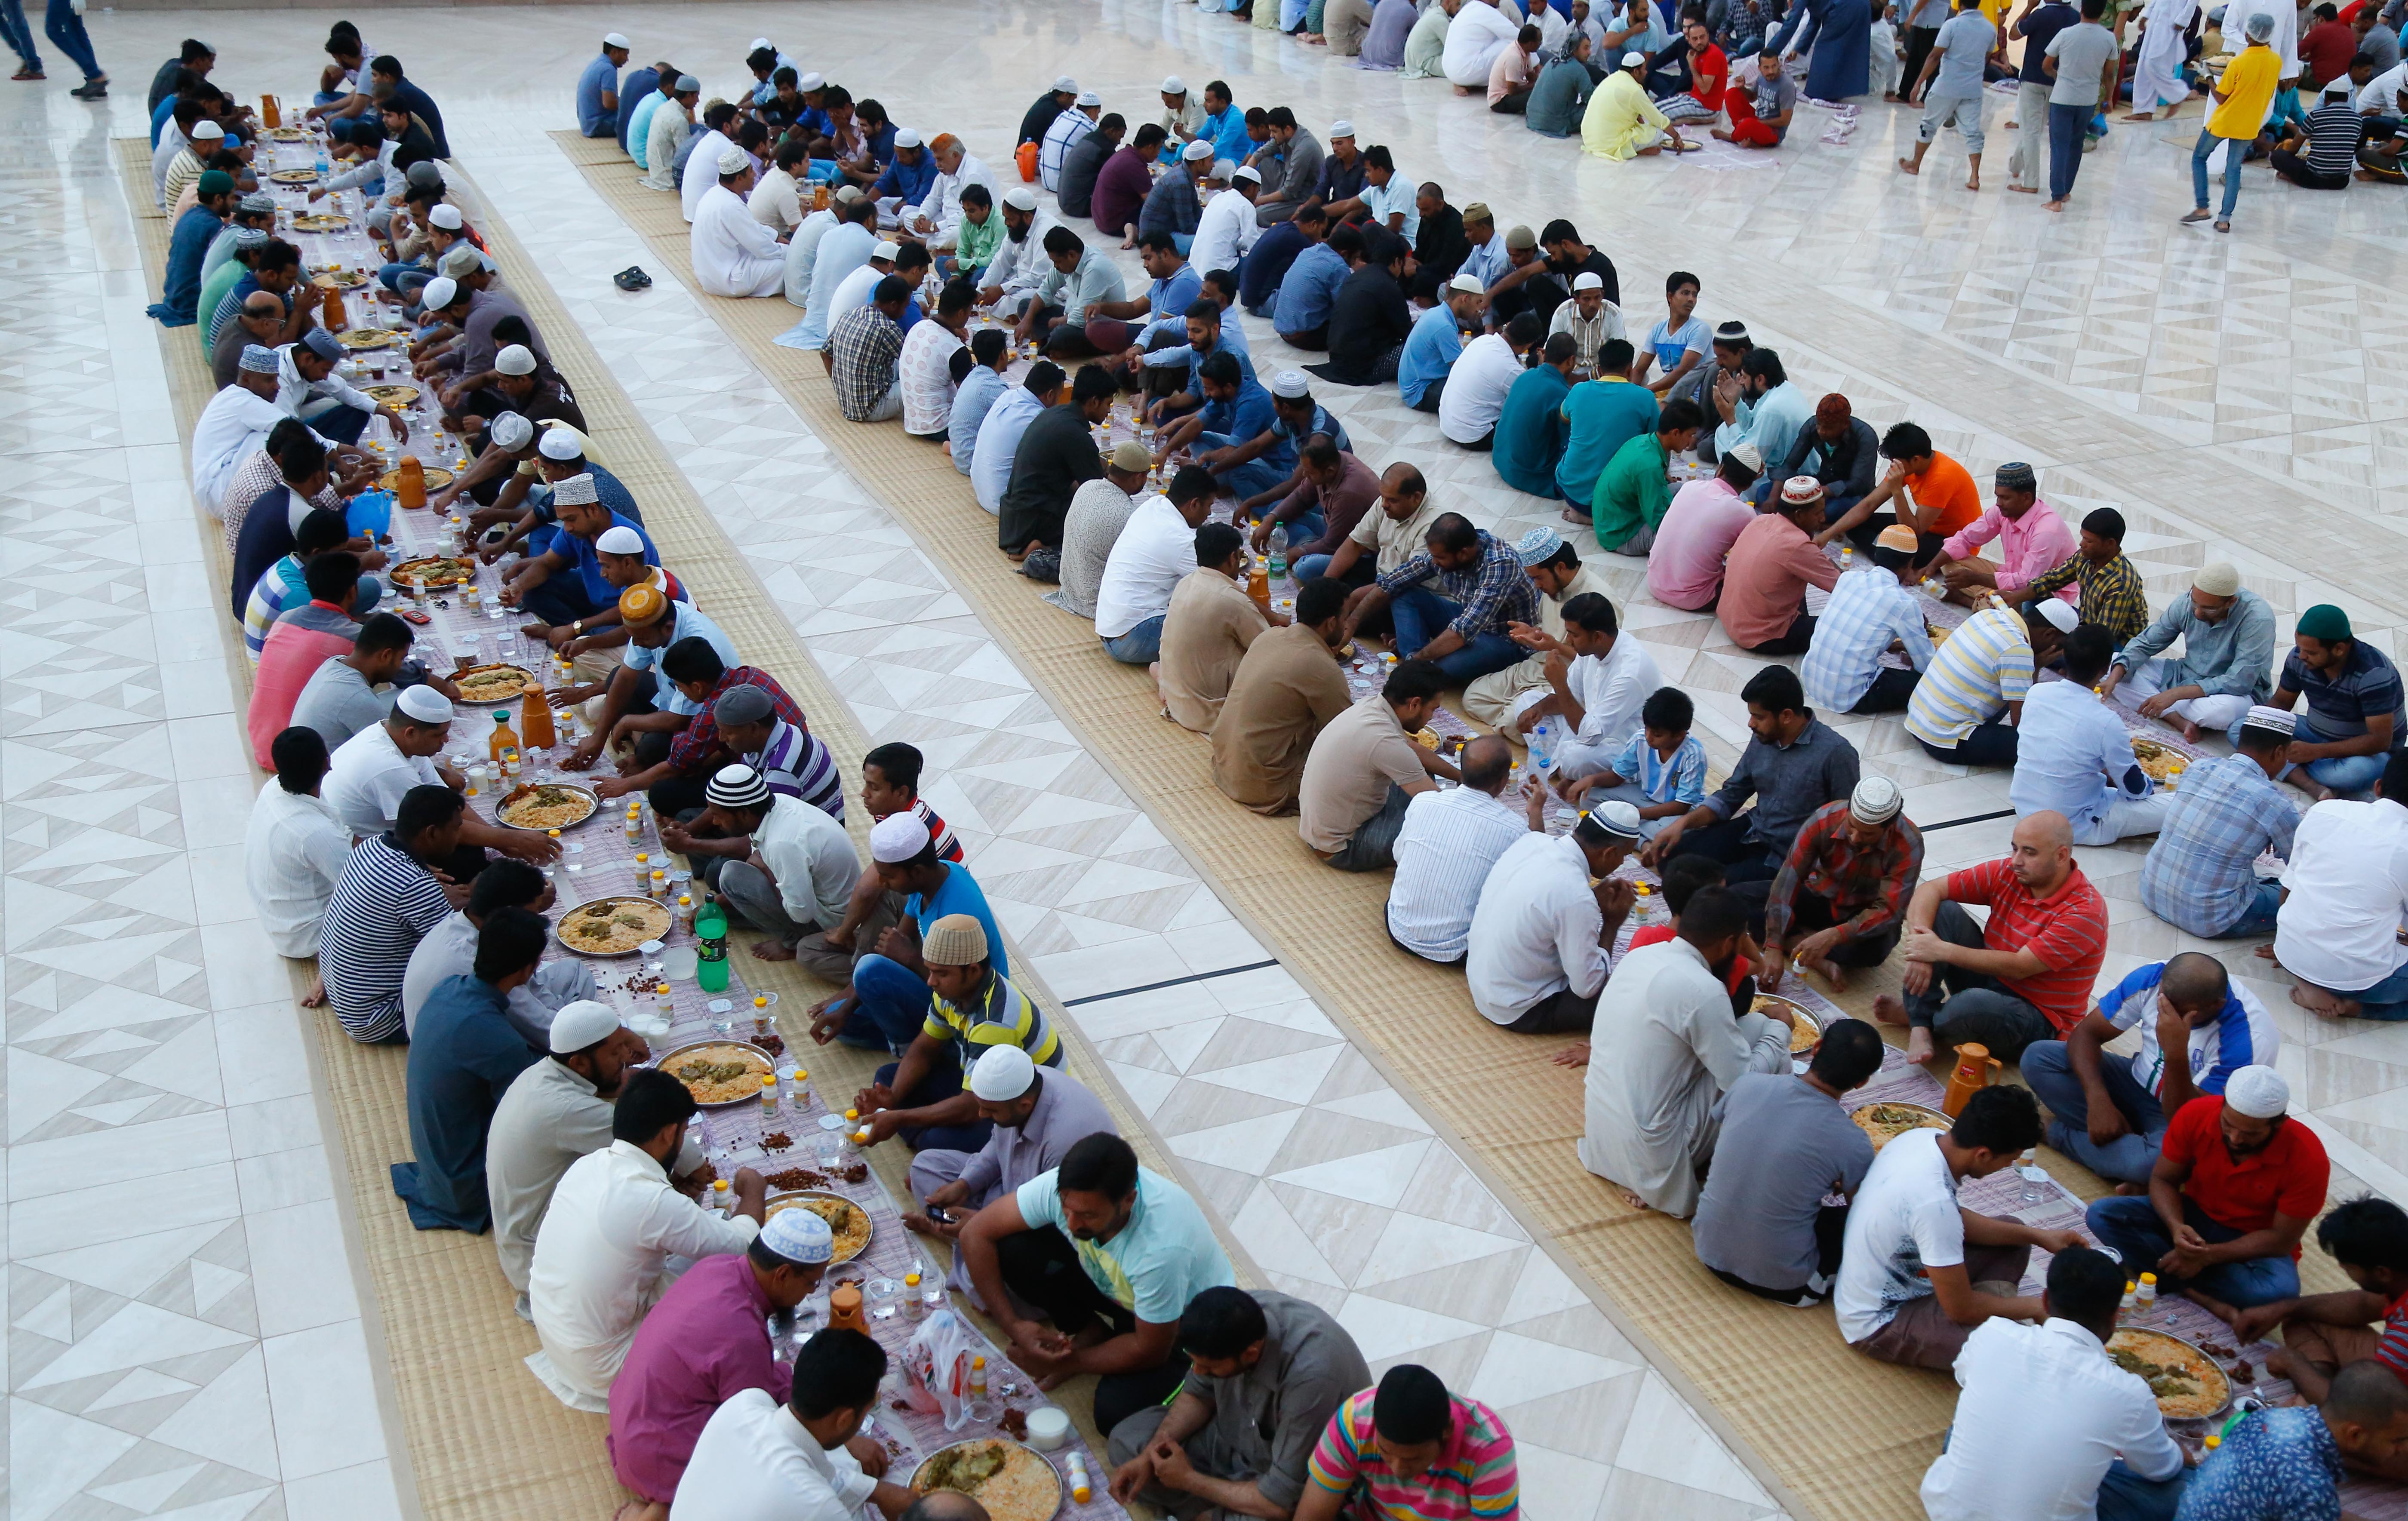 In pictures: People break their Ramadan fast at the Sultan Qaboos Grand Mosque